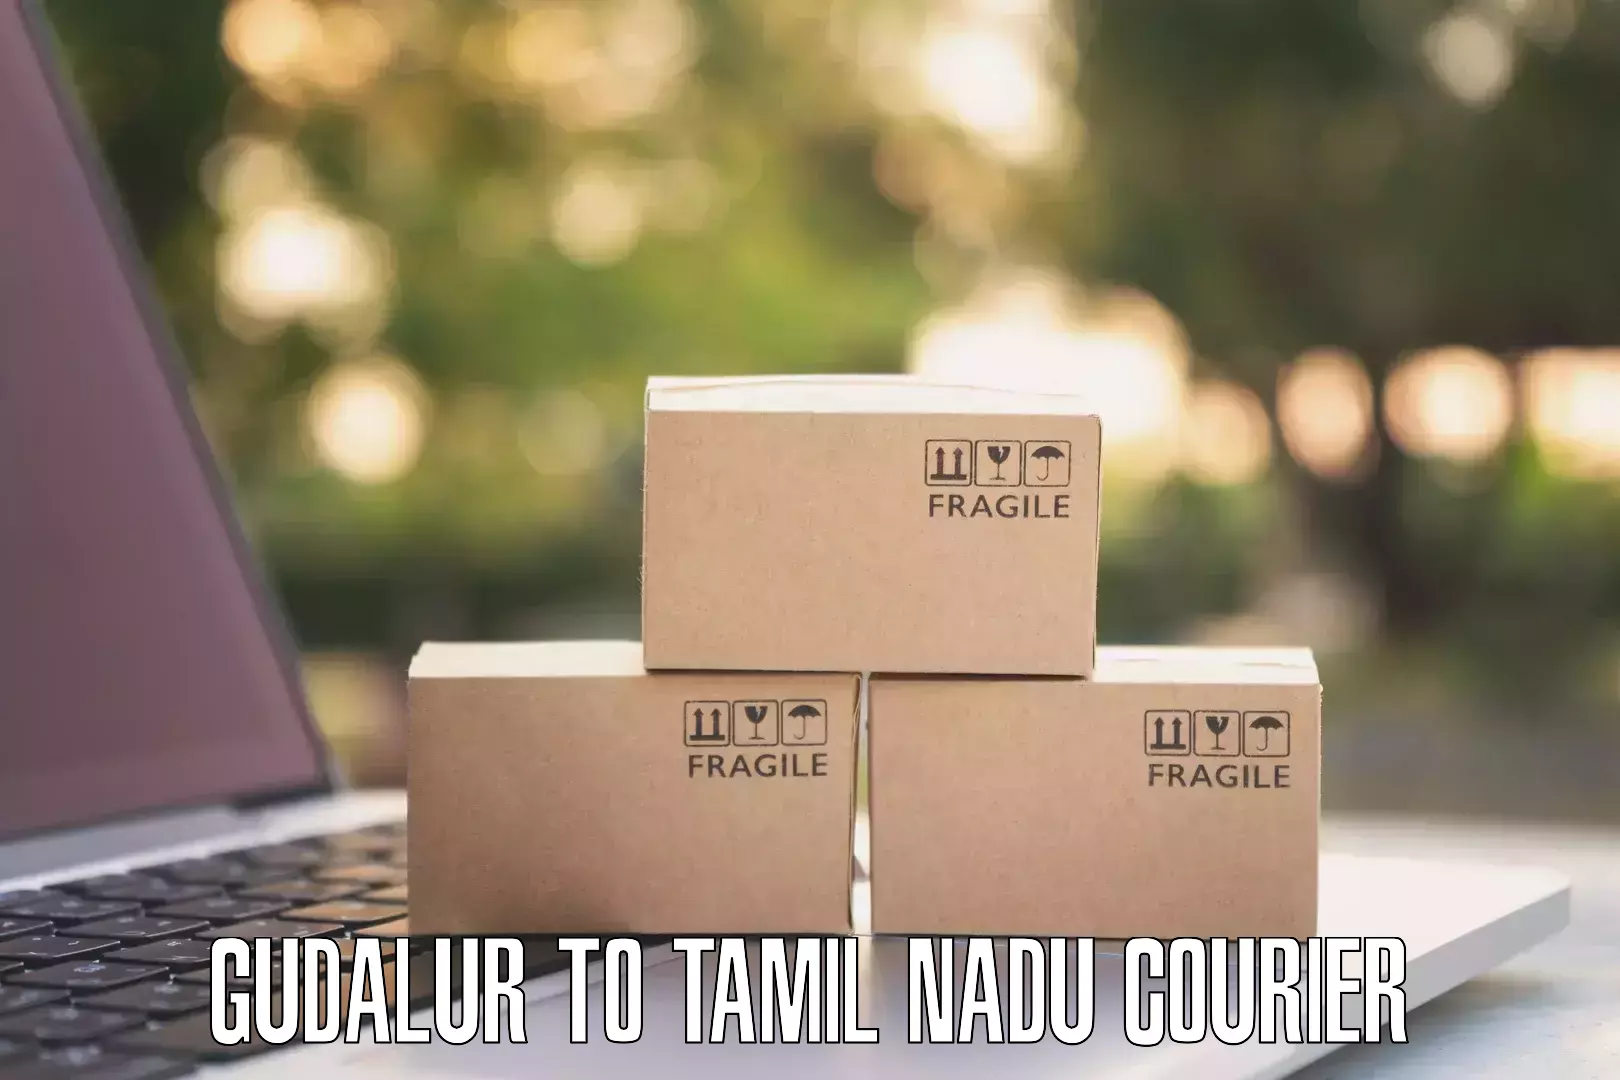 Online shipping calculator Gudalur to Anthiyur